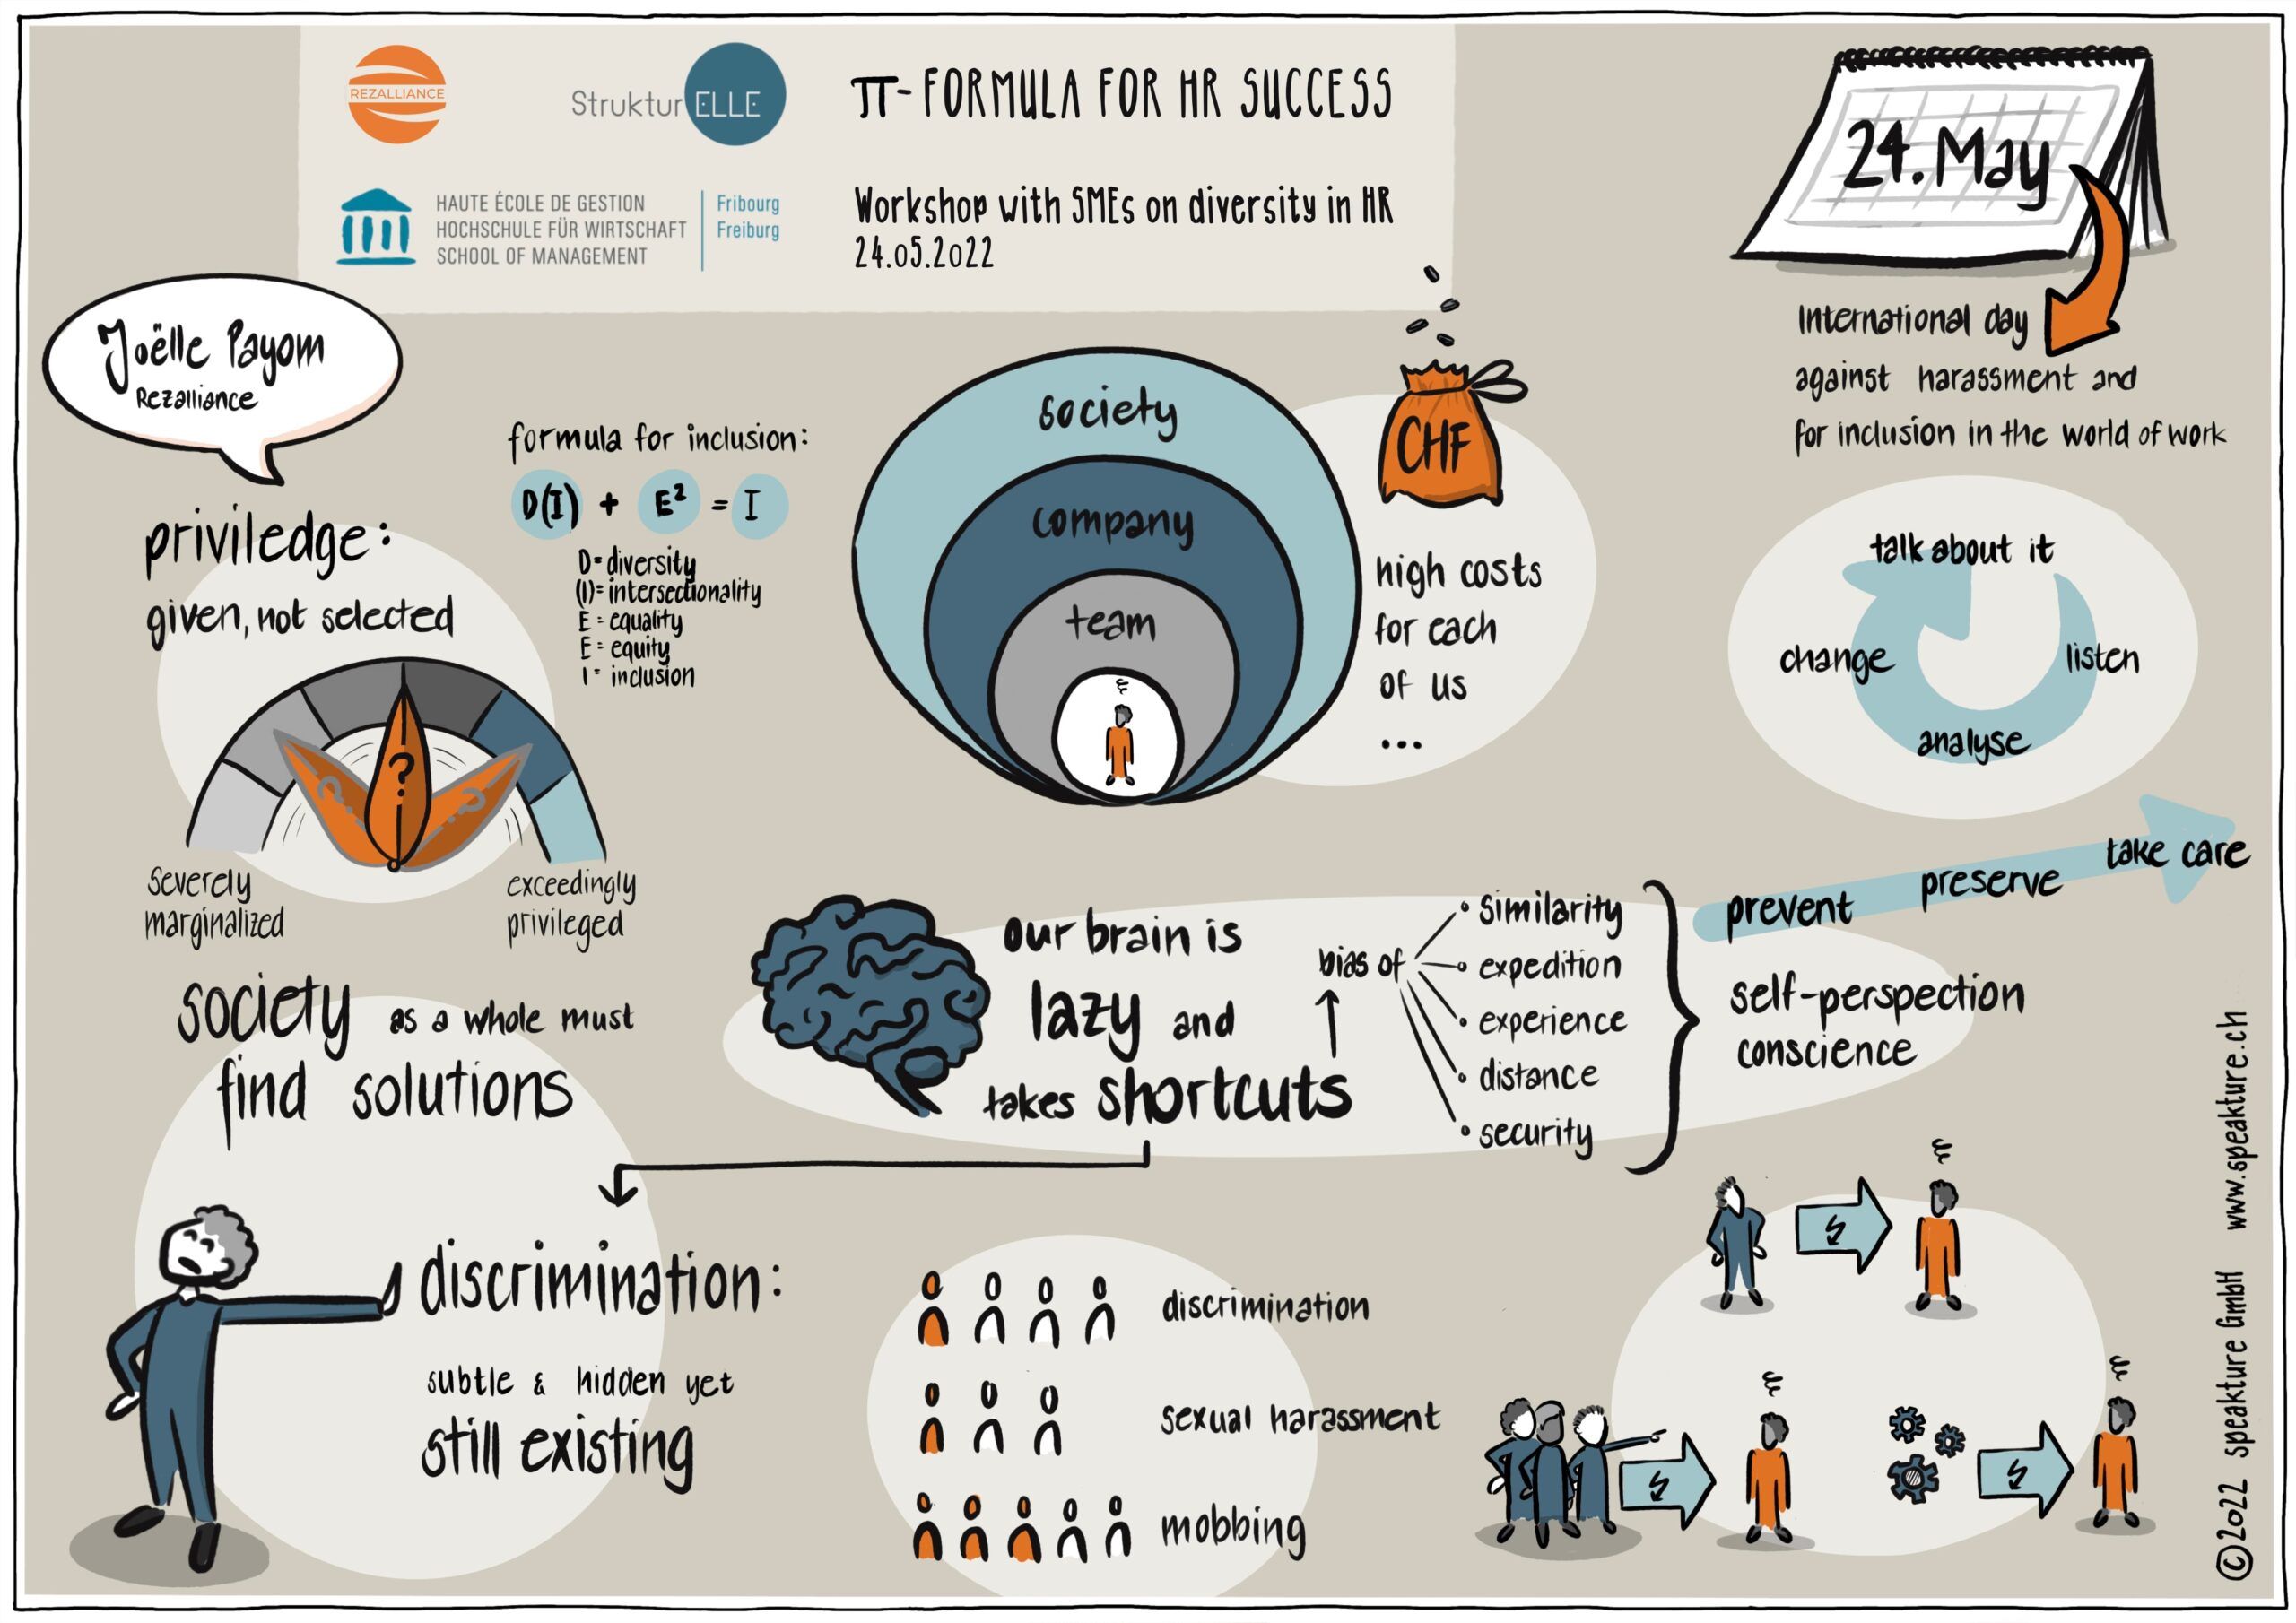 Graphic Recording by speakture for the introduction of the international day against harassment and for inclusion in the workplace